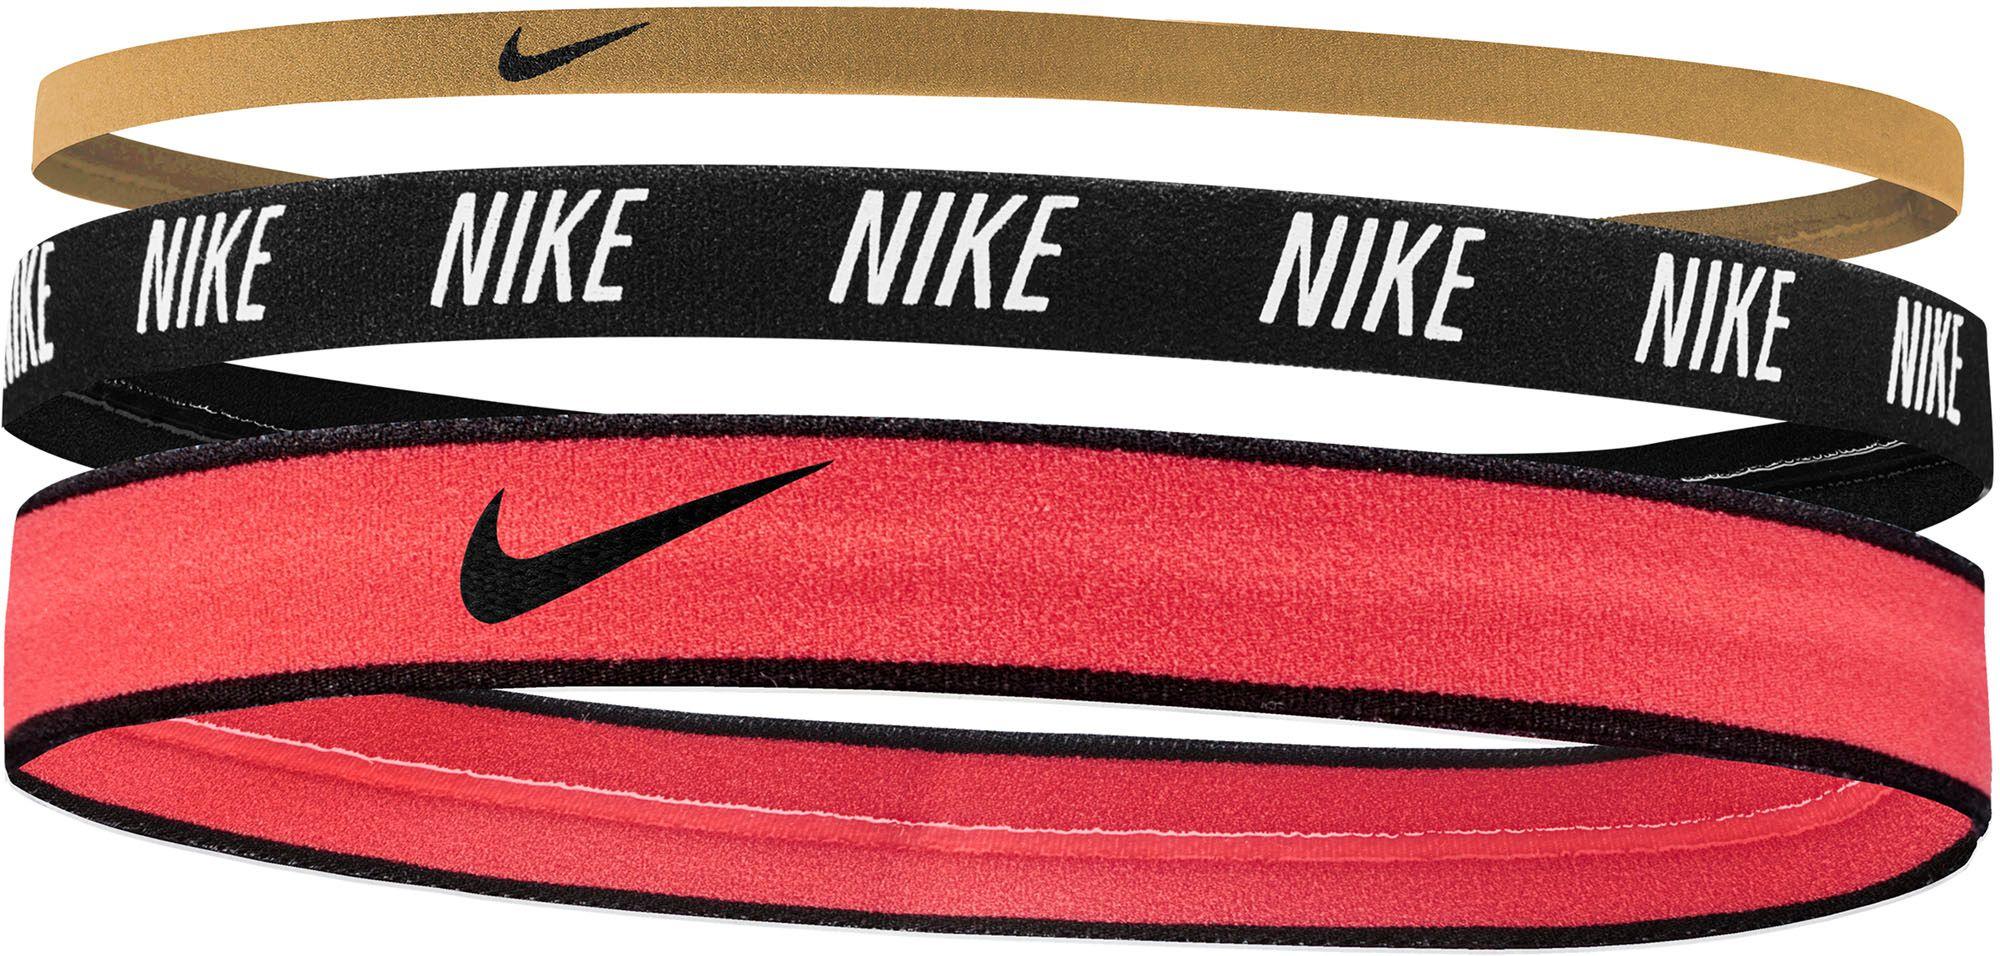 Mixed Red and Black Nike Logo - Lyst 3 Pack Mixed Headbands In Black